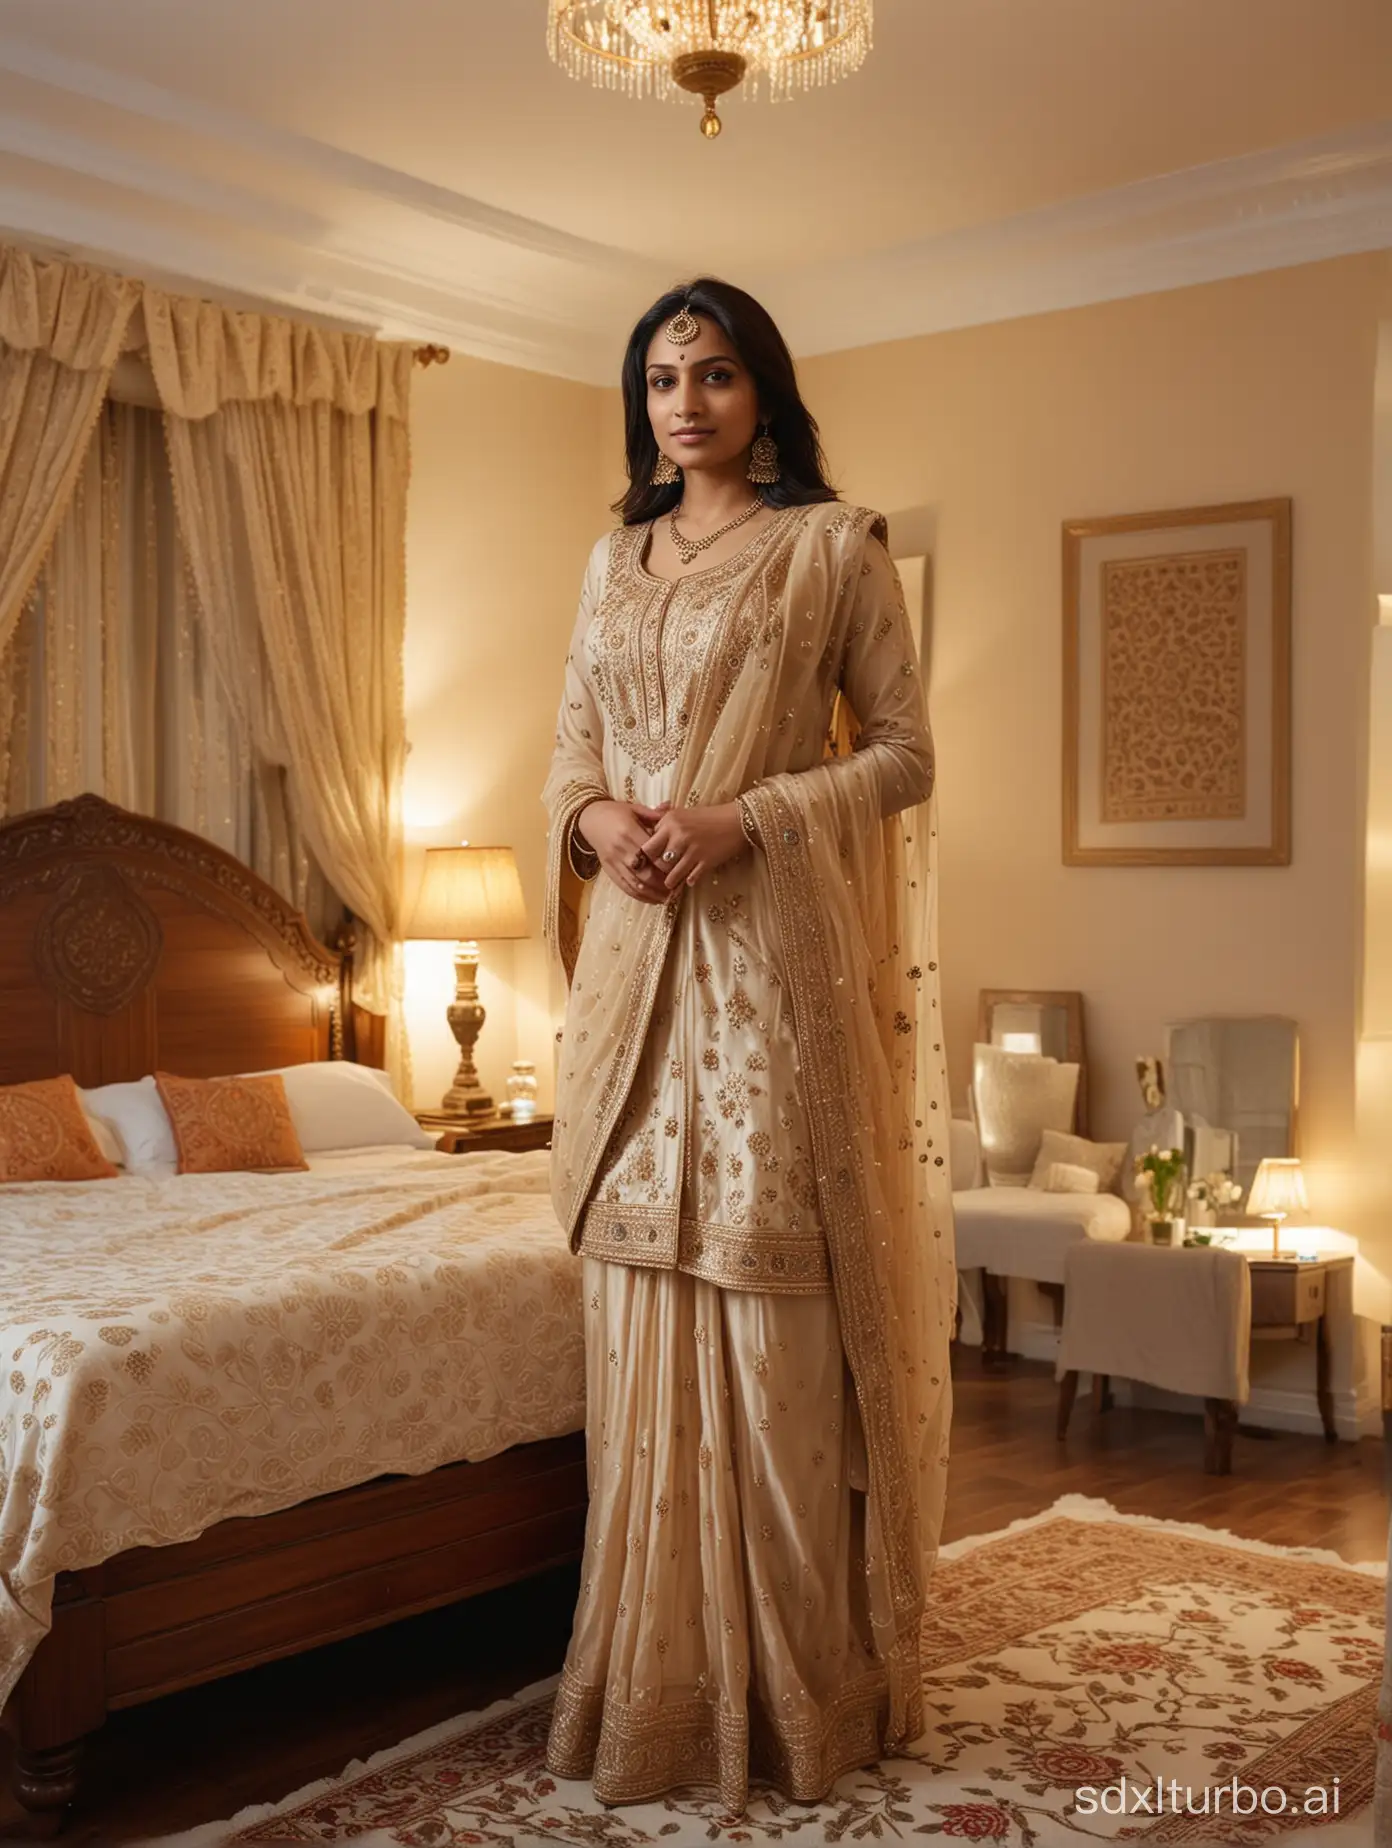 Traditional-Indian-Style-Bedroom-with-Embroidered-Party-Wear-Woman